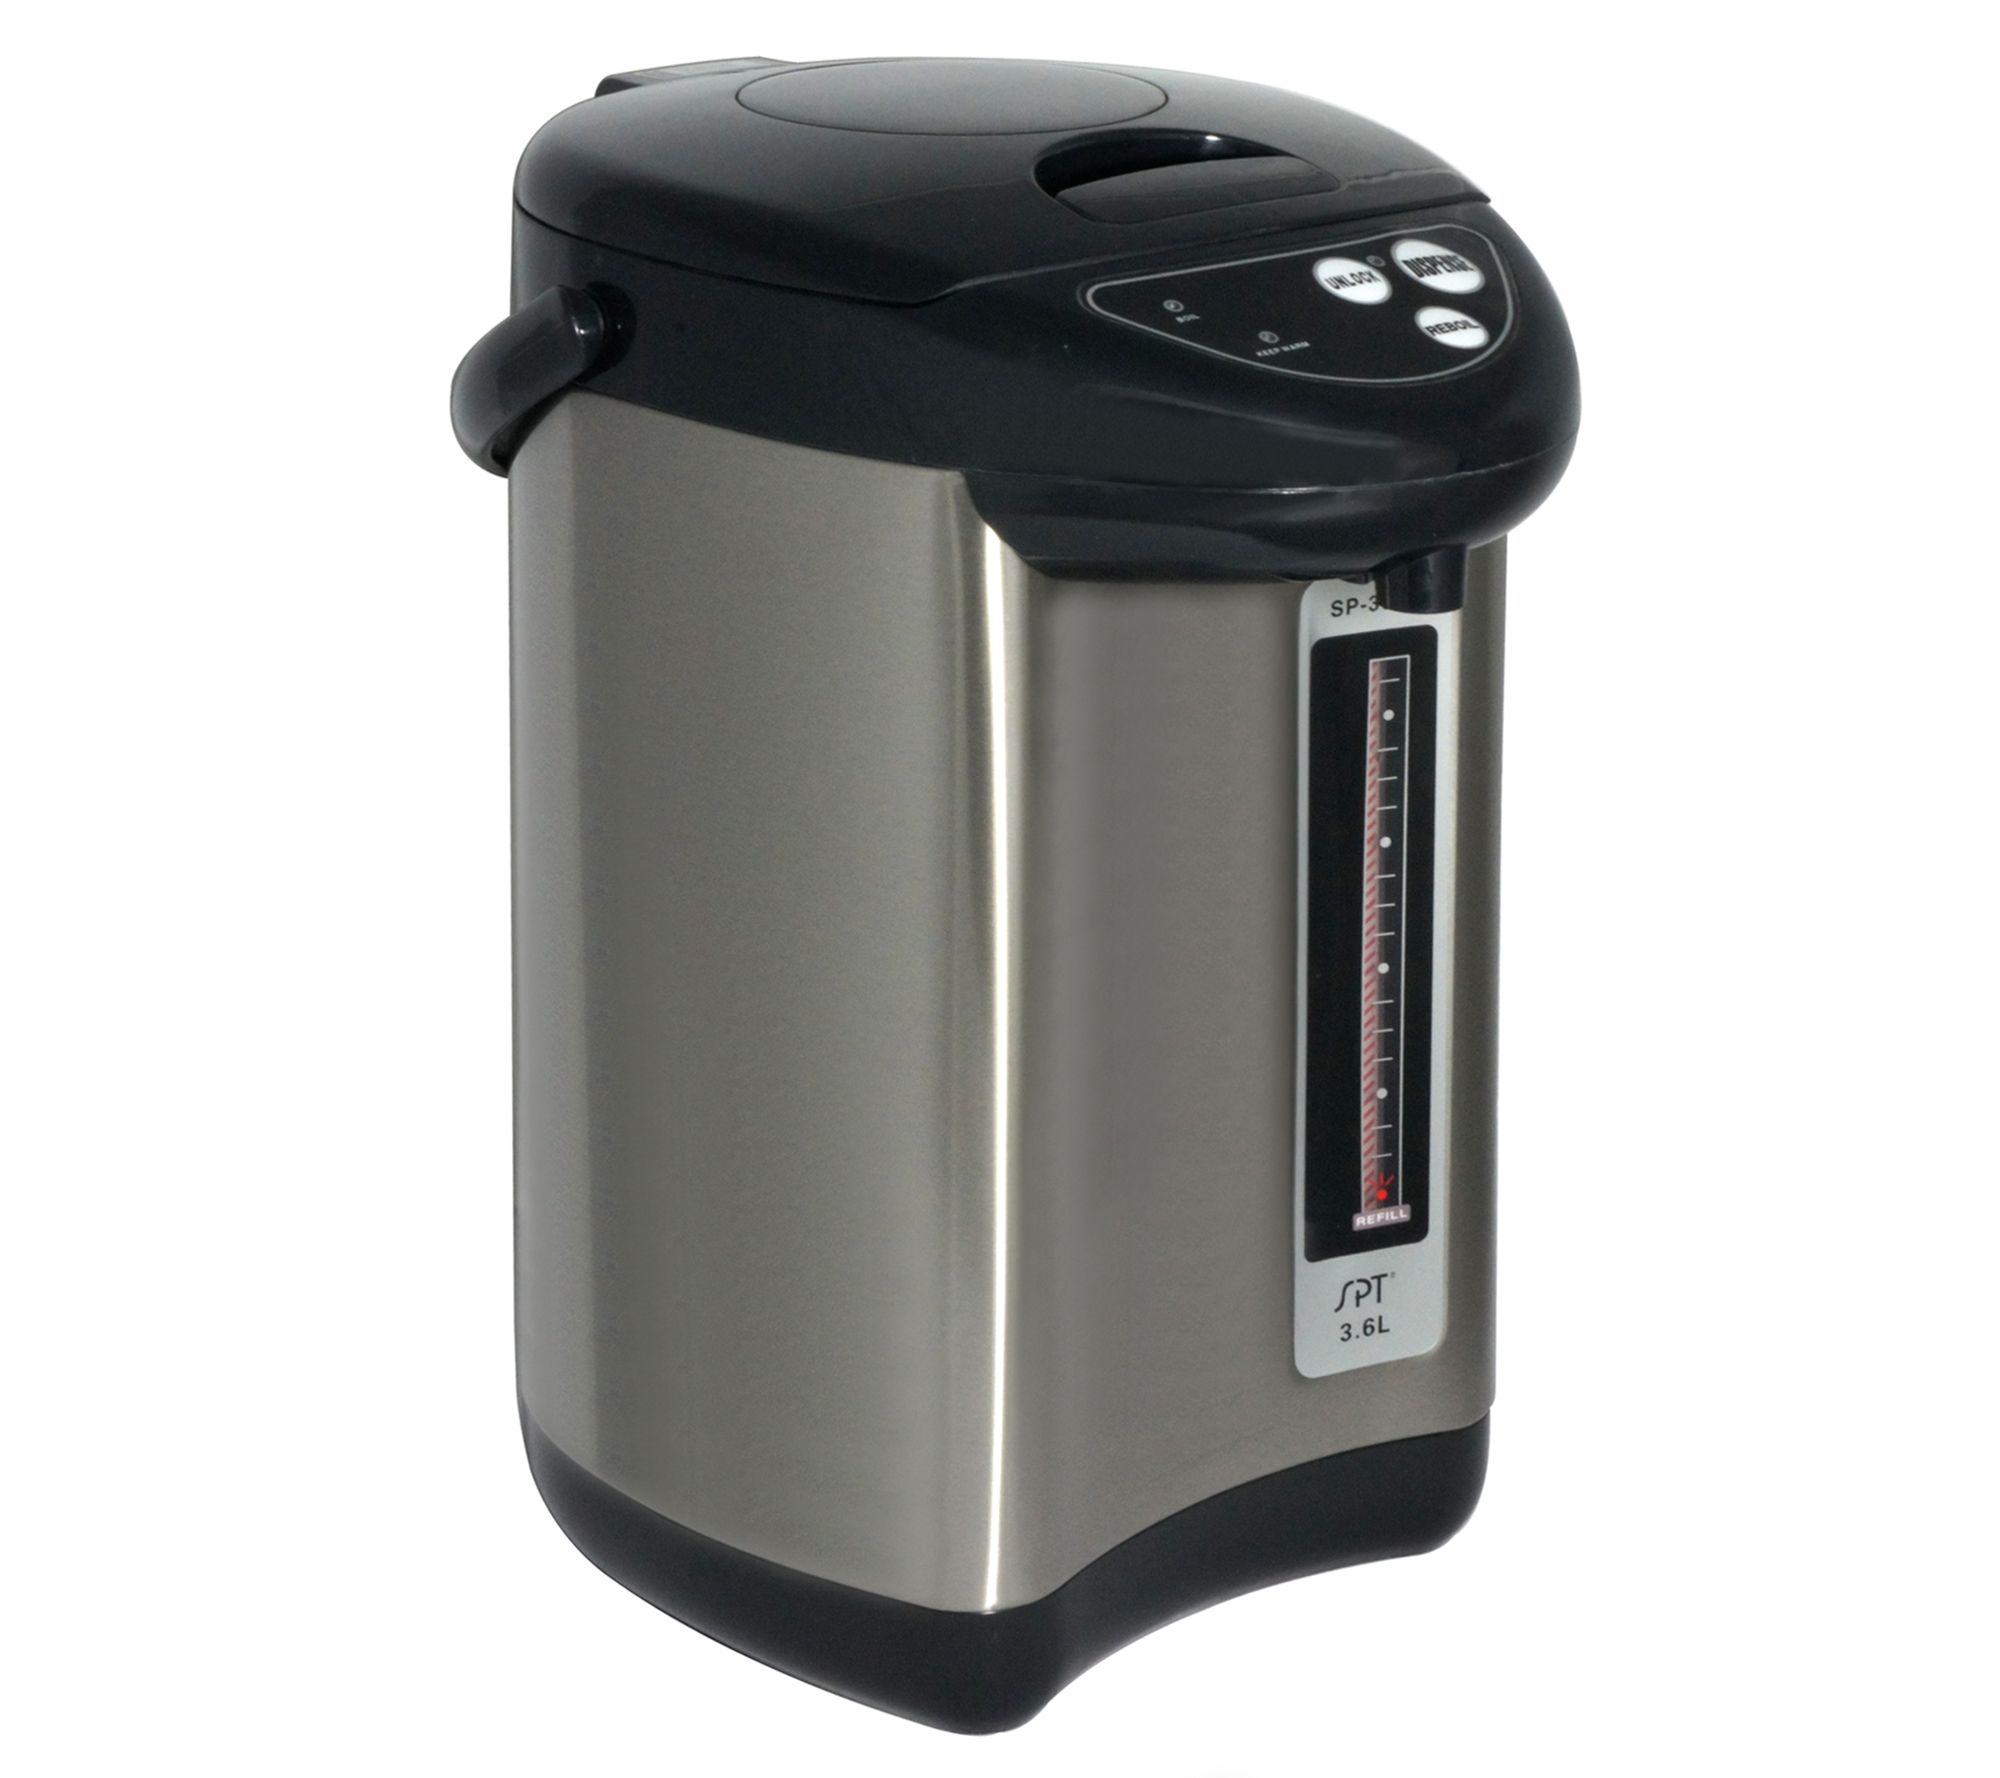 electric hot water boiler with dispenser